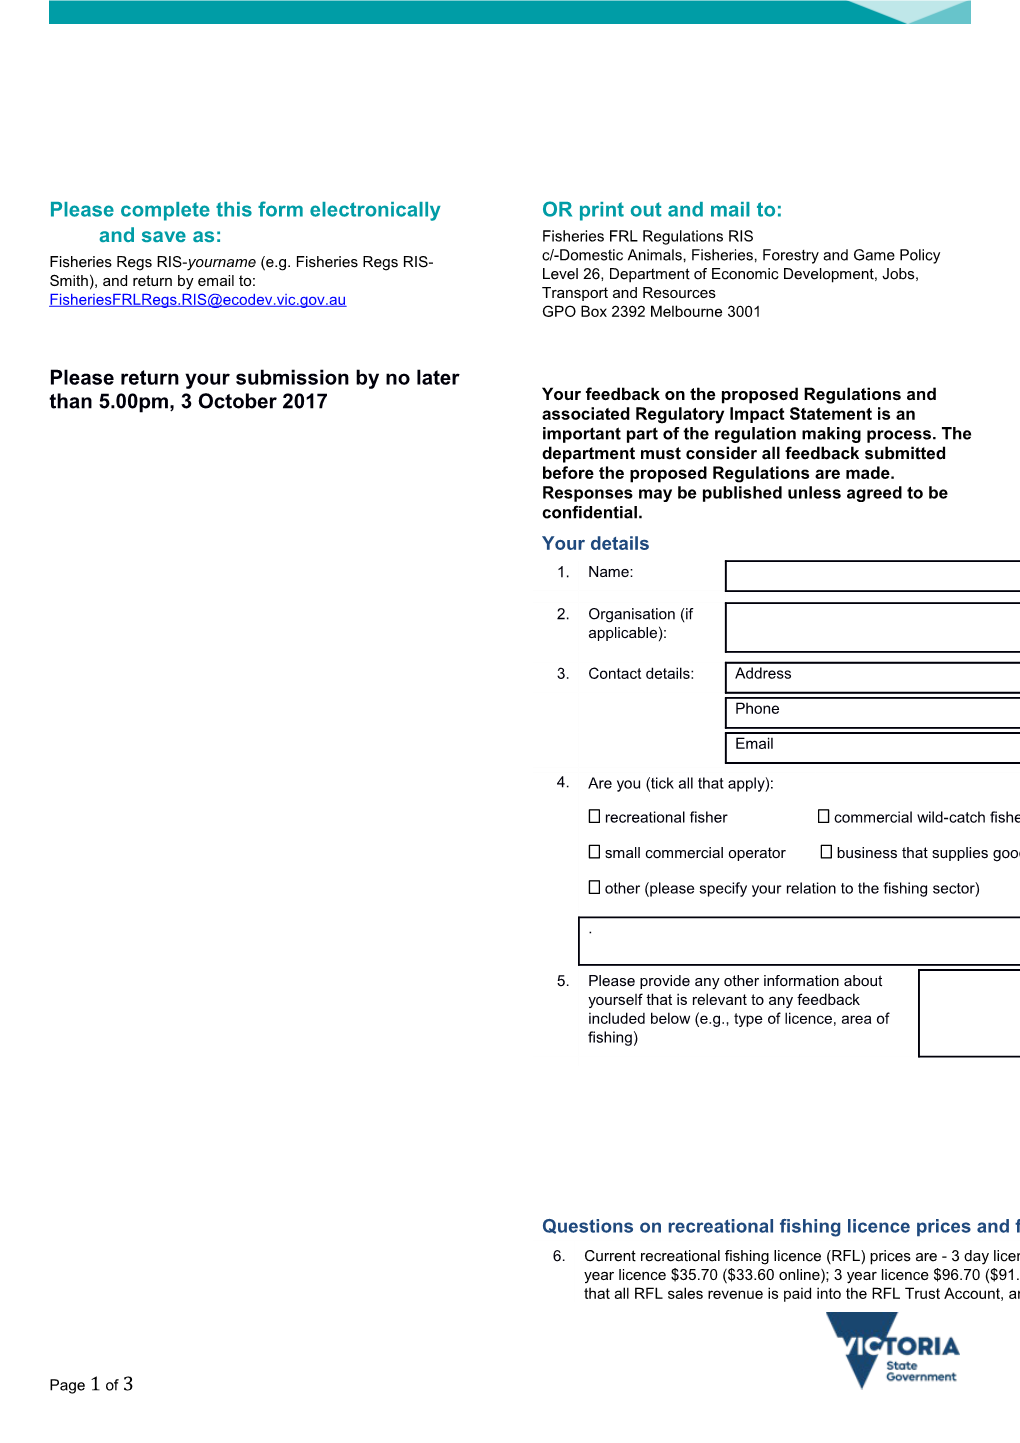 Please Complete This Form Electronically and Save As